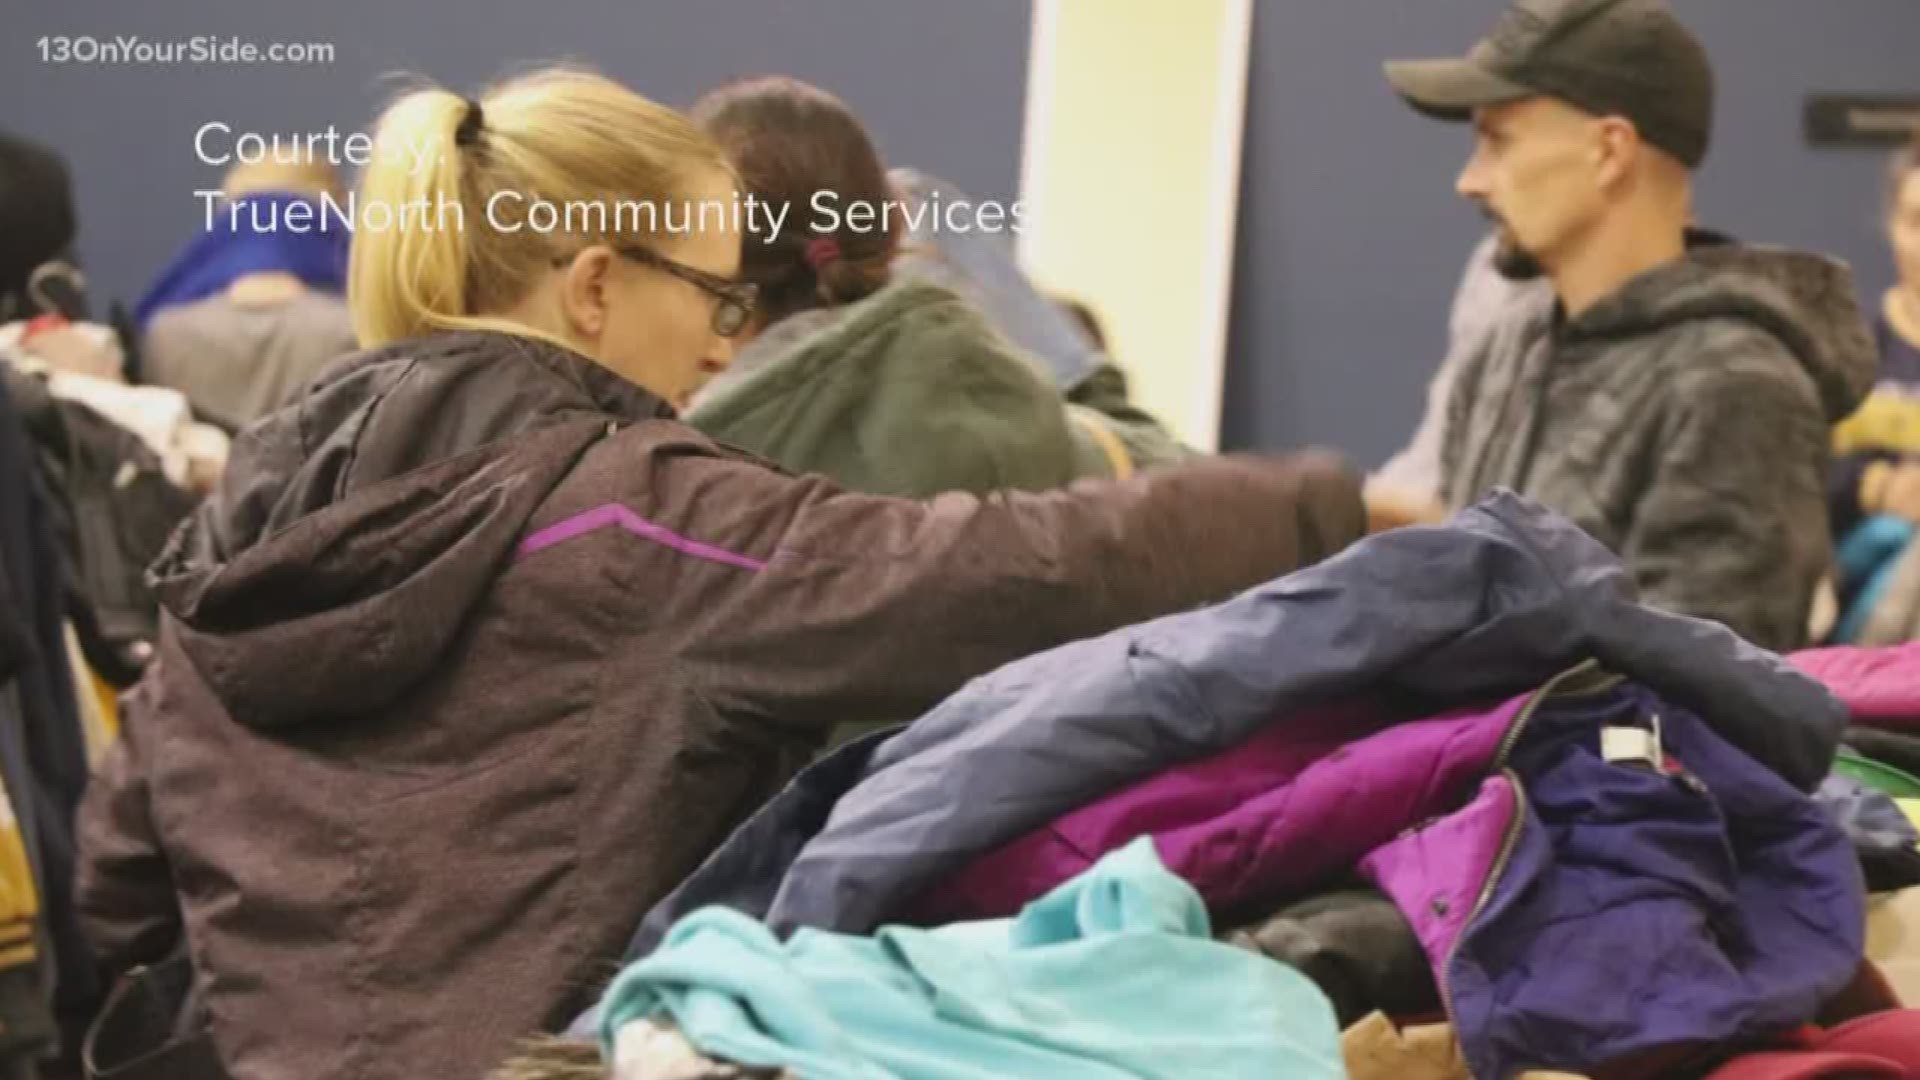 Hundreds of kids and their parents are better prepared to deal with this winter's cold weather thanks to the nonprofit.